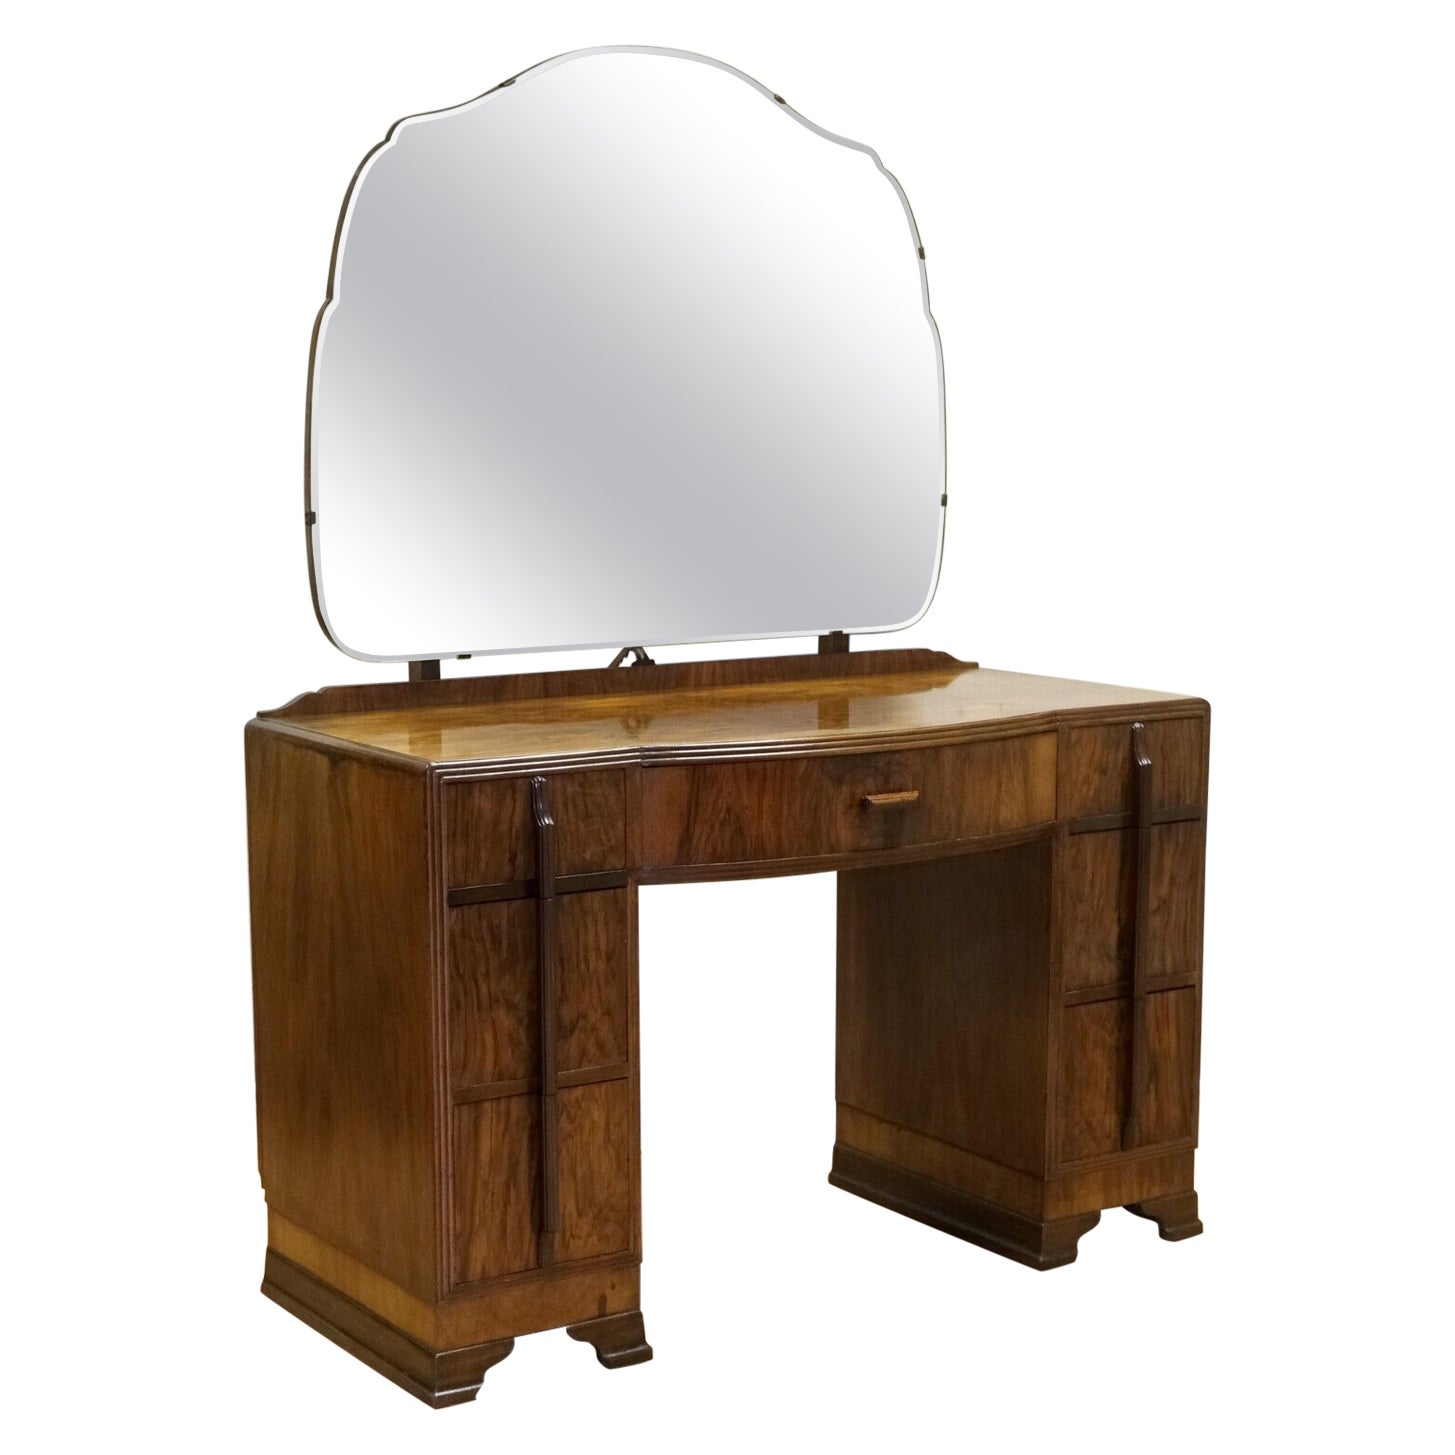 STUNNING 1920's ART DECO BURR WALNUT DRESSING TABLE WITH SEVEN DRAWERS